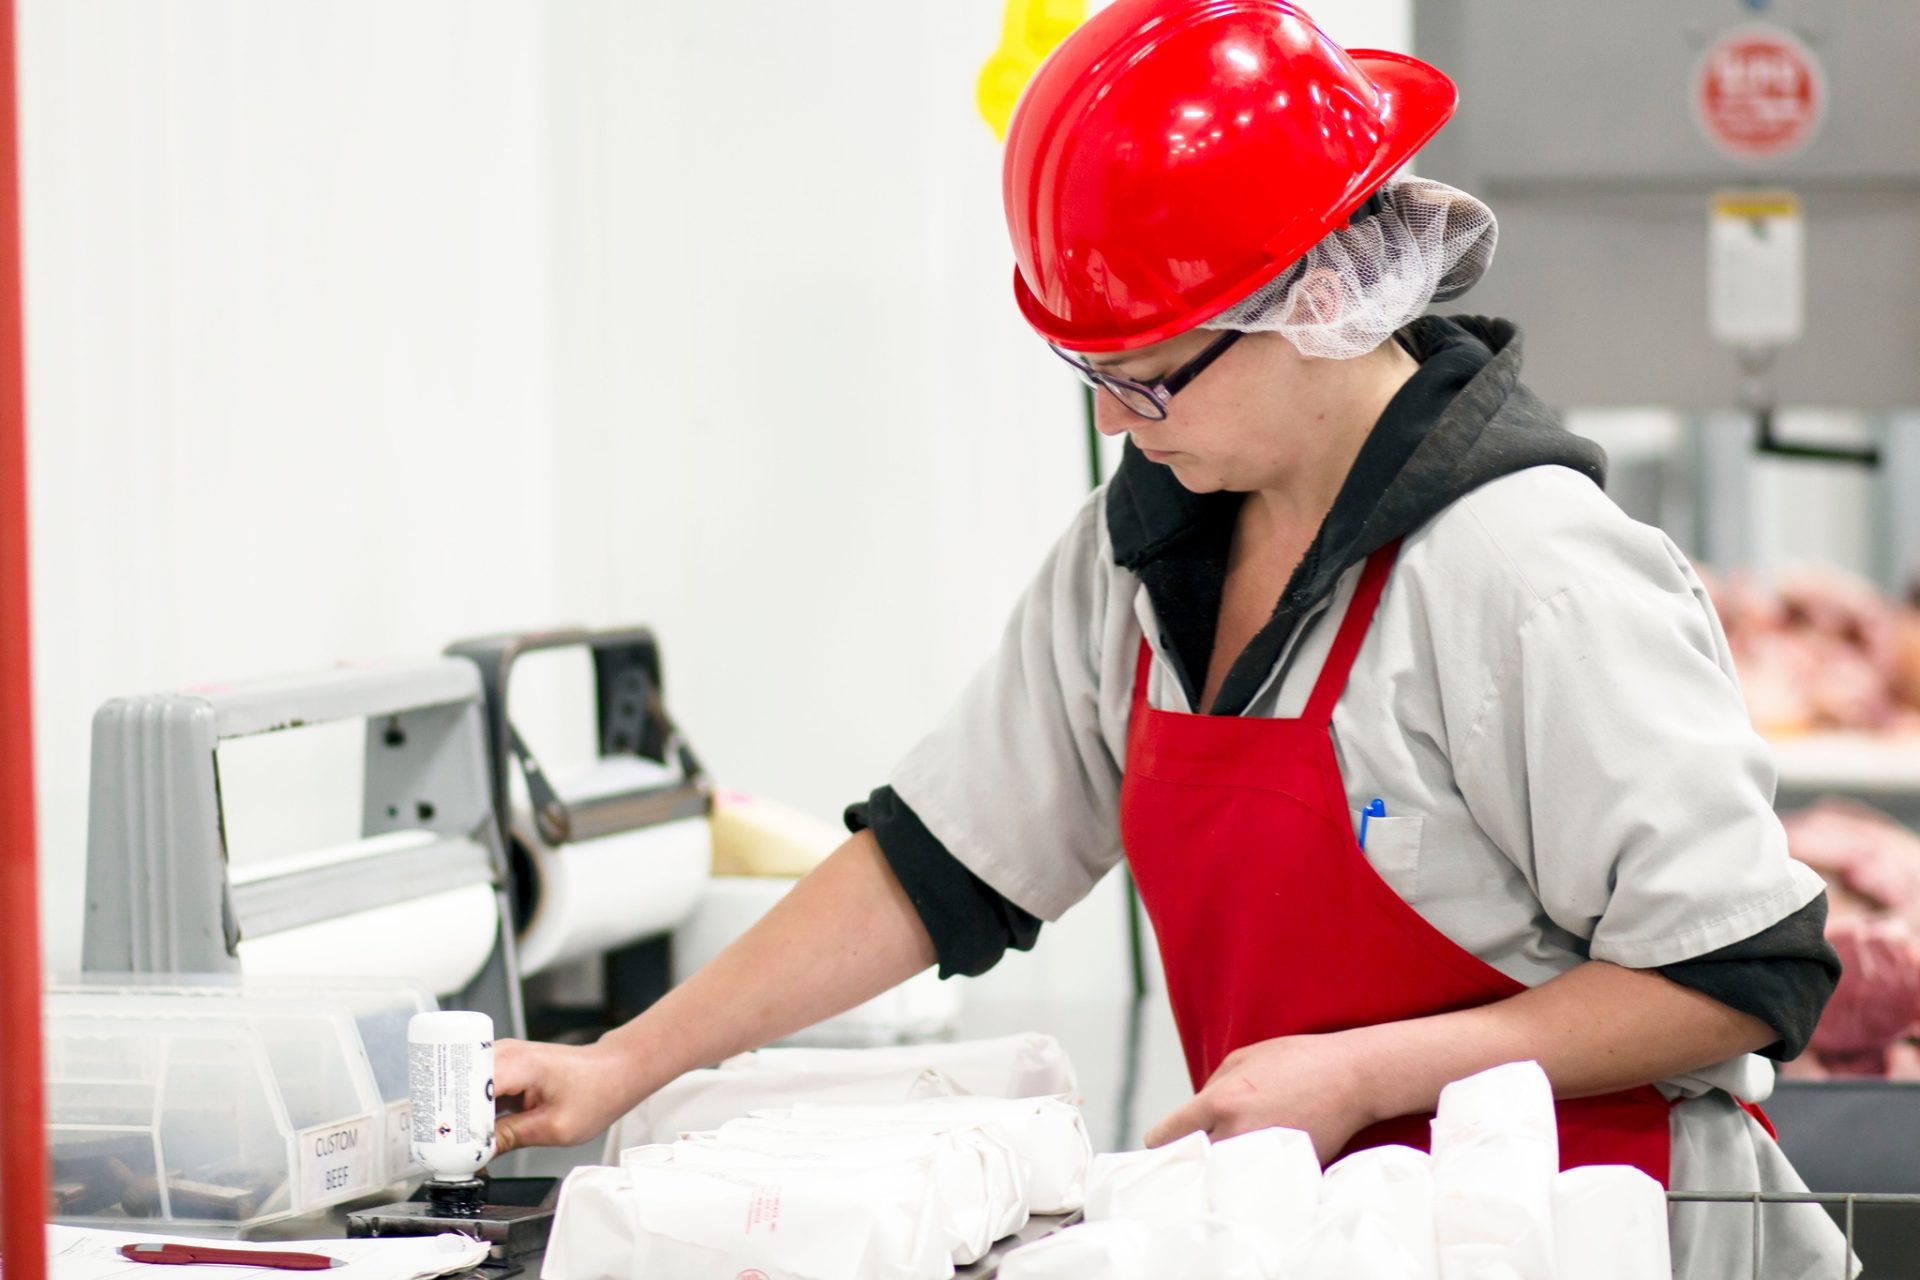 A worker in sterile clothing and hat packaging meat.